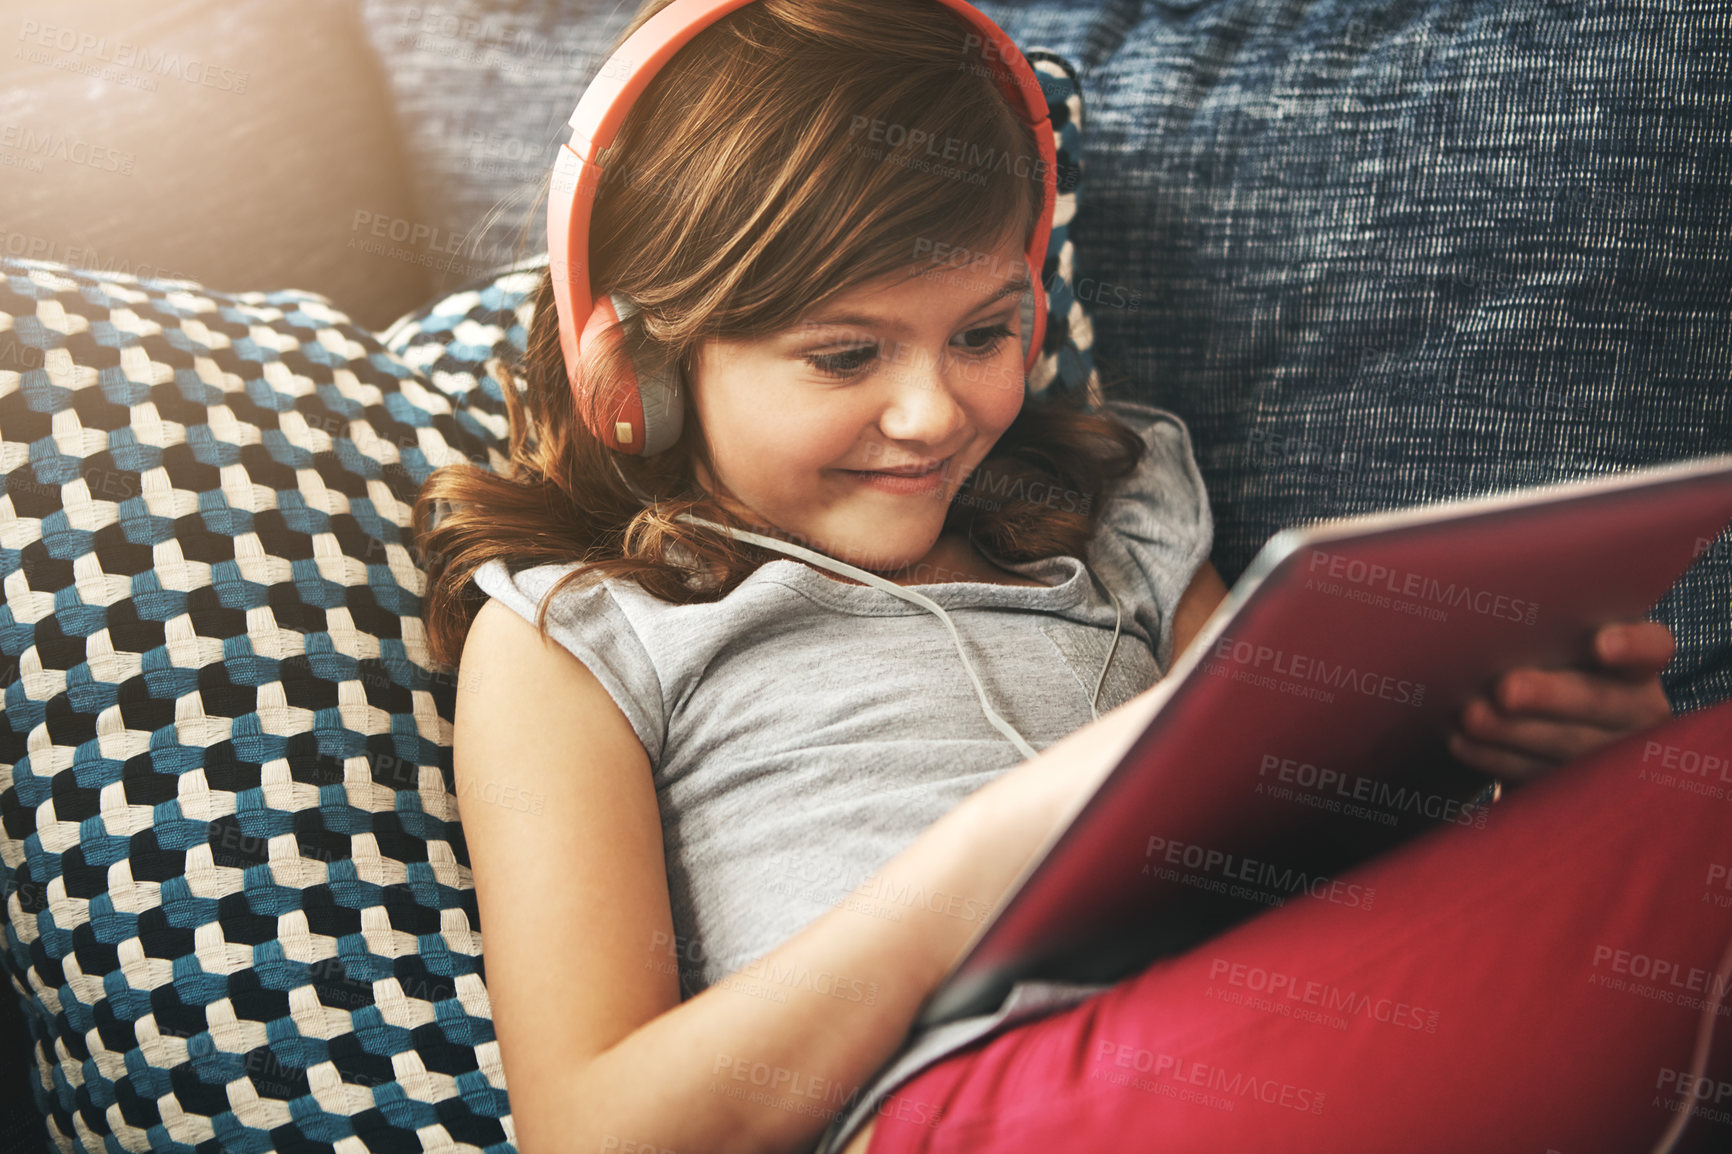 Buy stock photo Shot of a little girl wearing headphones while using a digital tablet at home